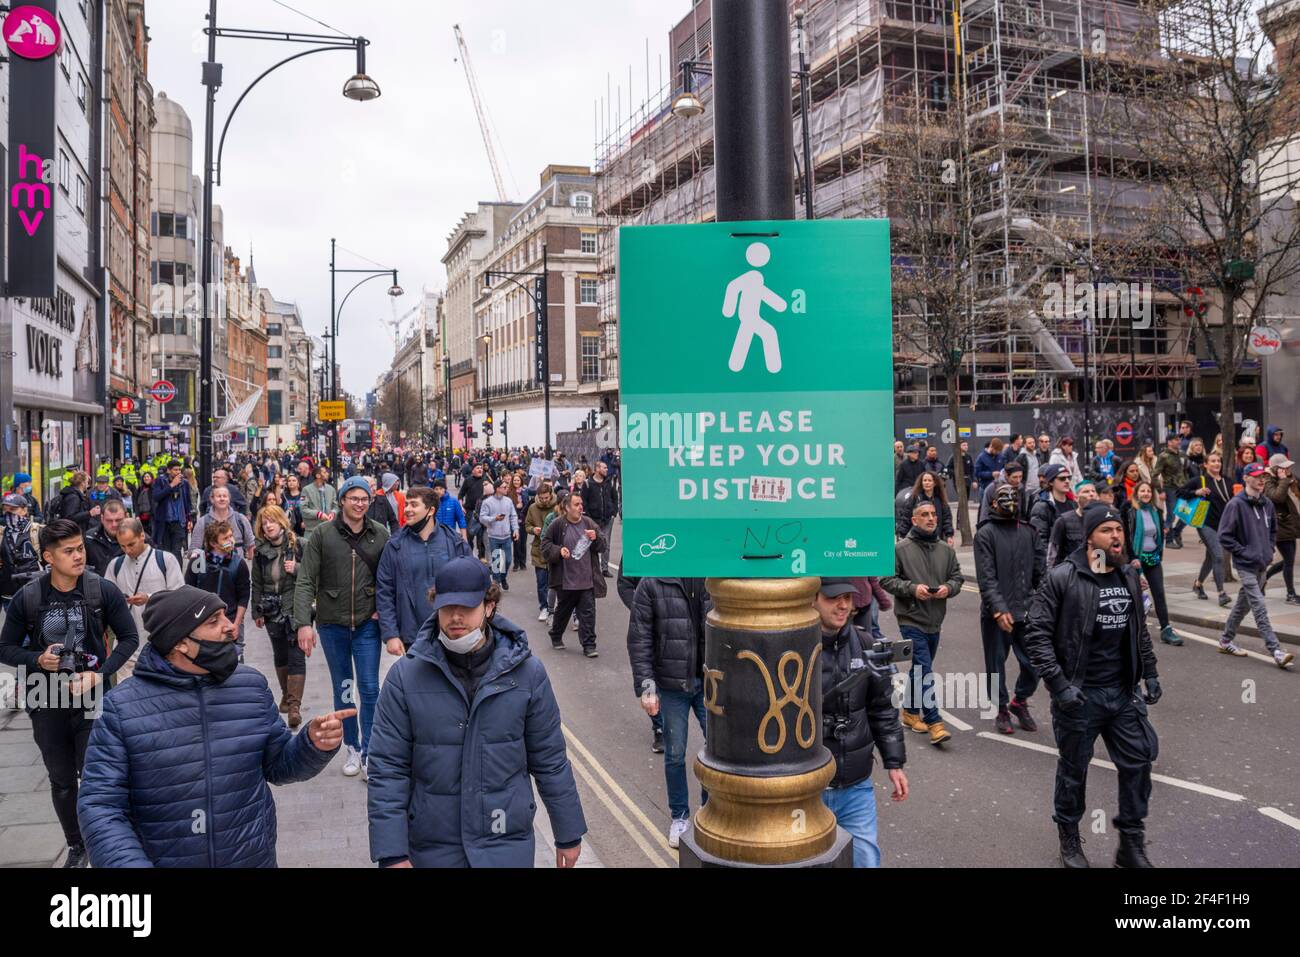 Protesters at a COVID 19 anti lockdown protest march in Westminster, London, UK, passing a social distancing sign which has been altered. Vandalised Stock Photo